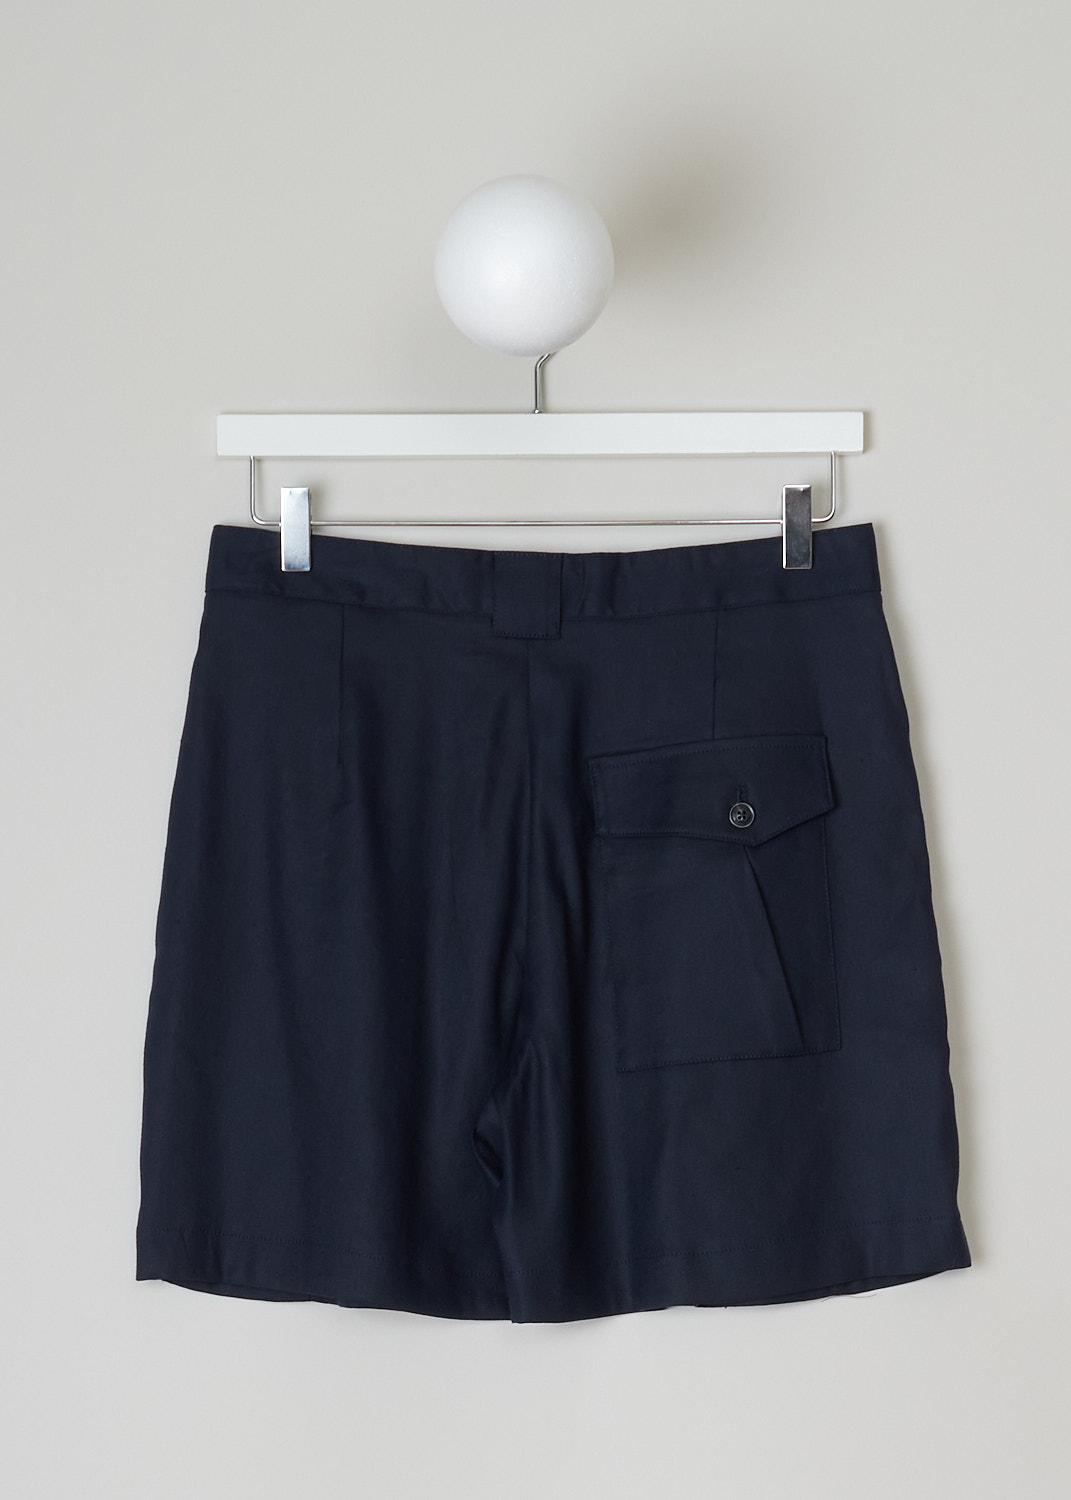 CLOSED, NAVY BLUE LINEN SHORTS, JOON_C92051_32L_22_561, Blue, Back, These high-waisted navy blue linen shorts have a waistband with belt loops and a button and zipper closure. Subtle knife pleats decorate the front. These shorts have slanted pockets in the front and a single buttoned patch pocket in the back. 
